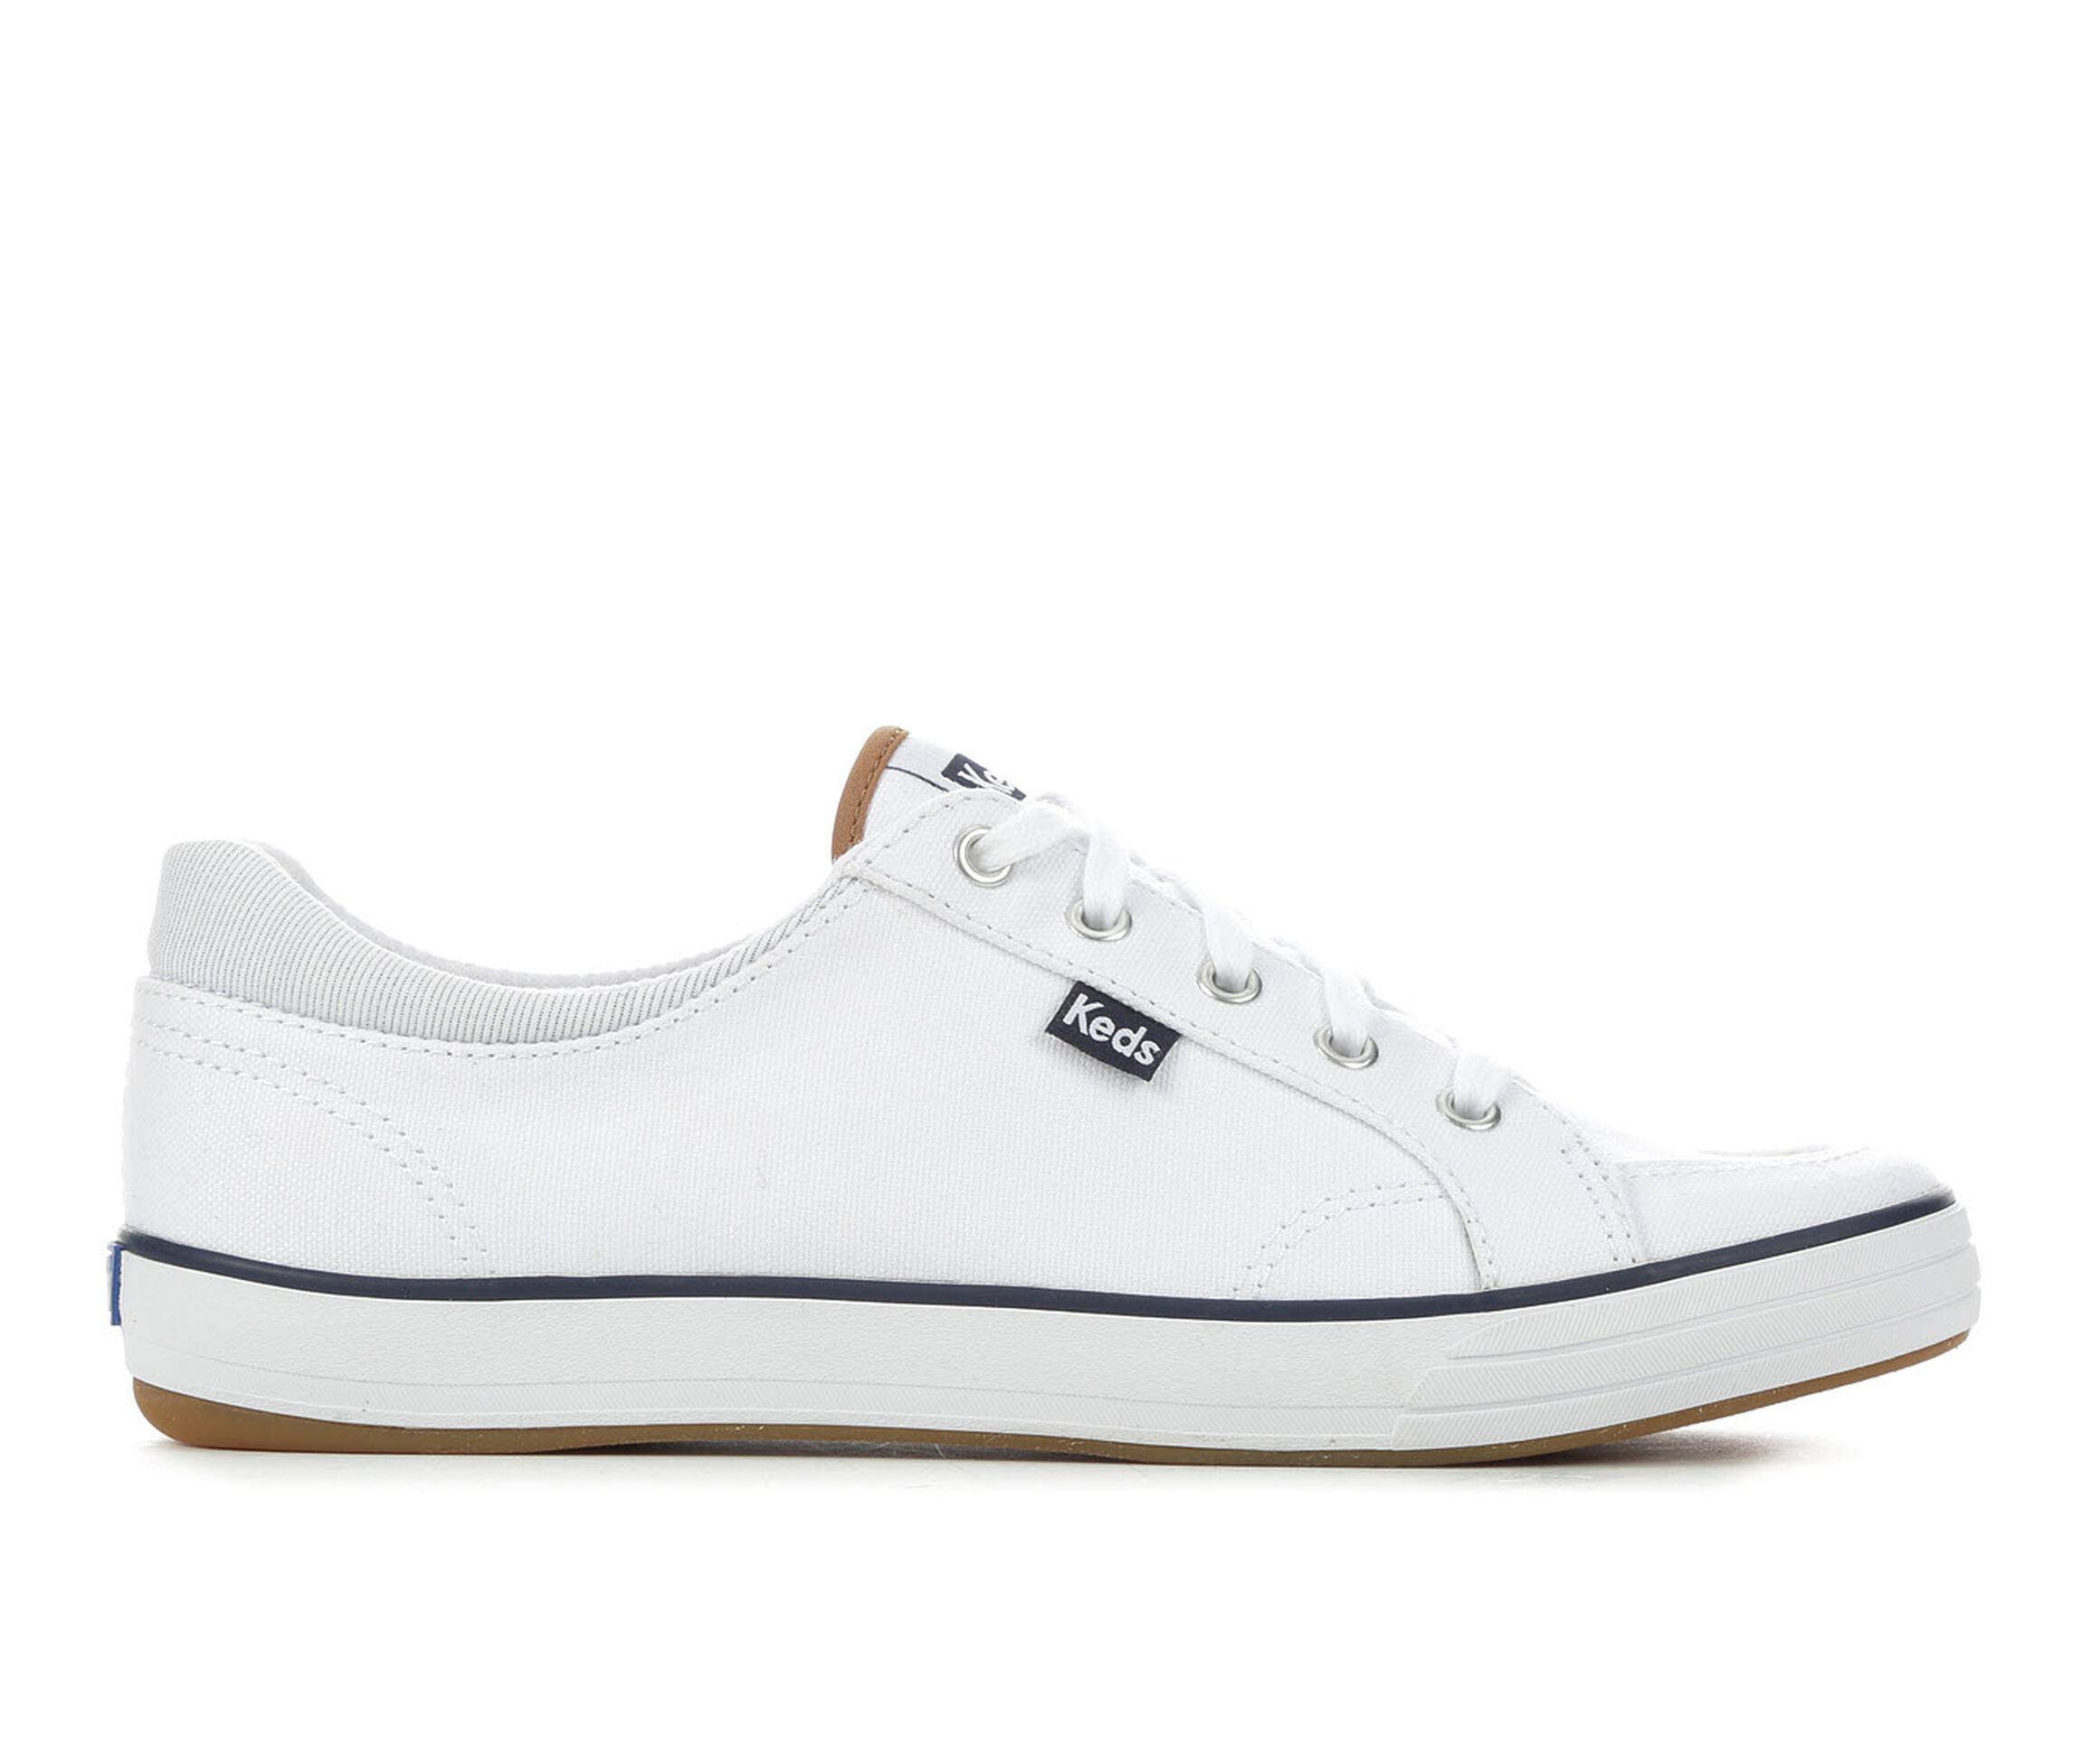 Keds Shoes & Slip-On Sneakers